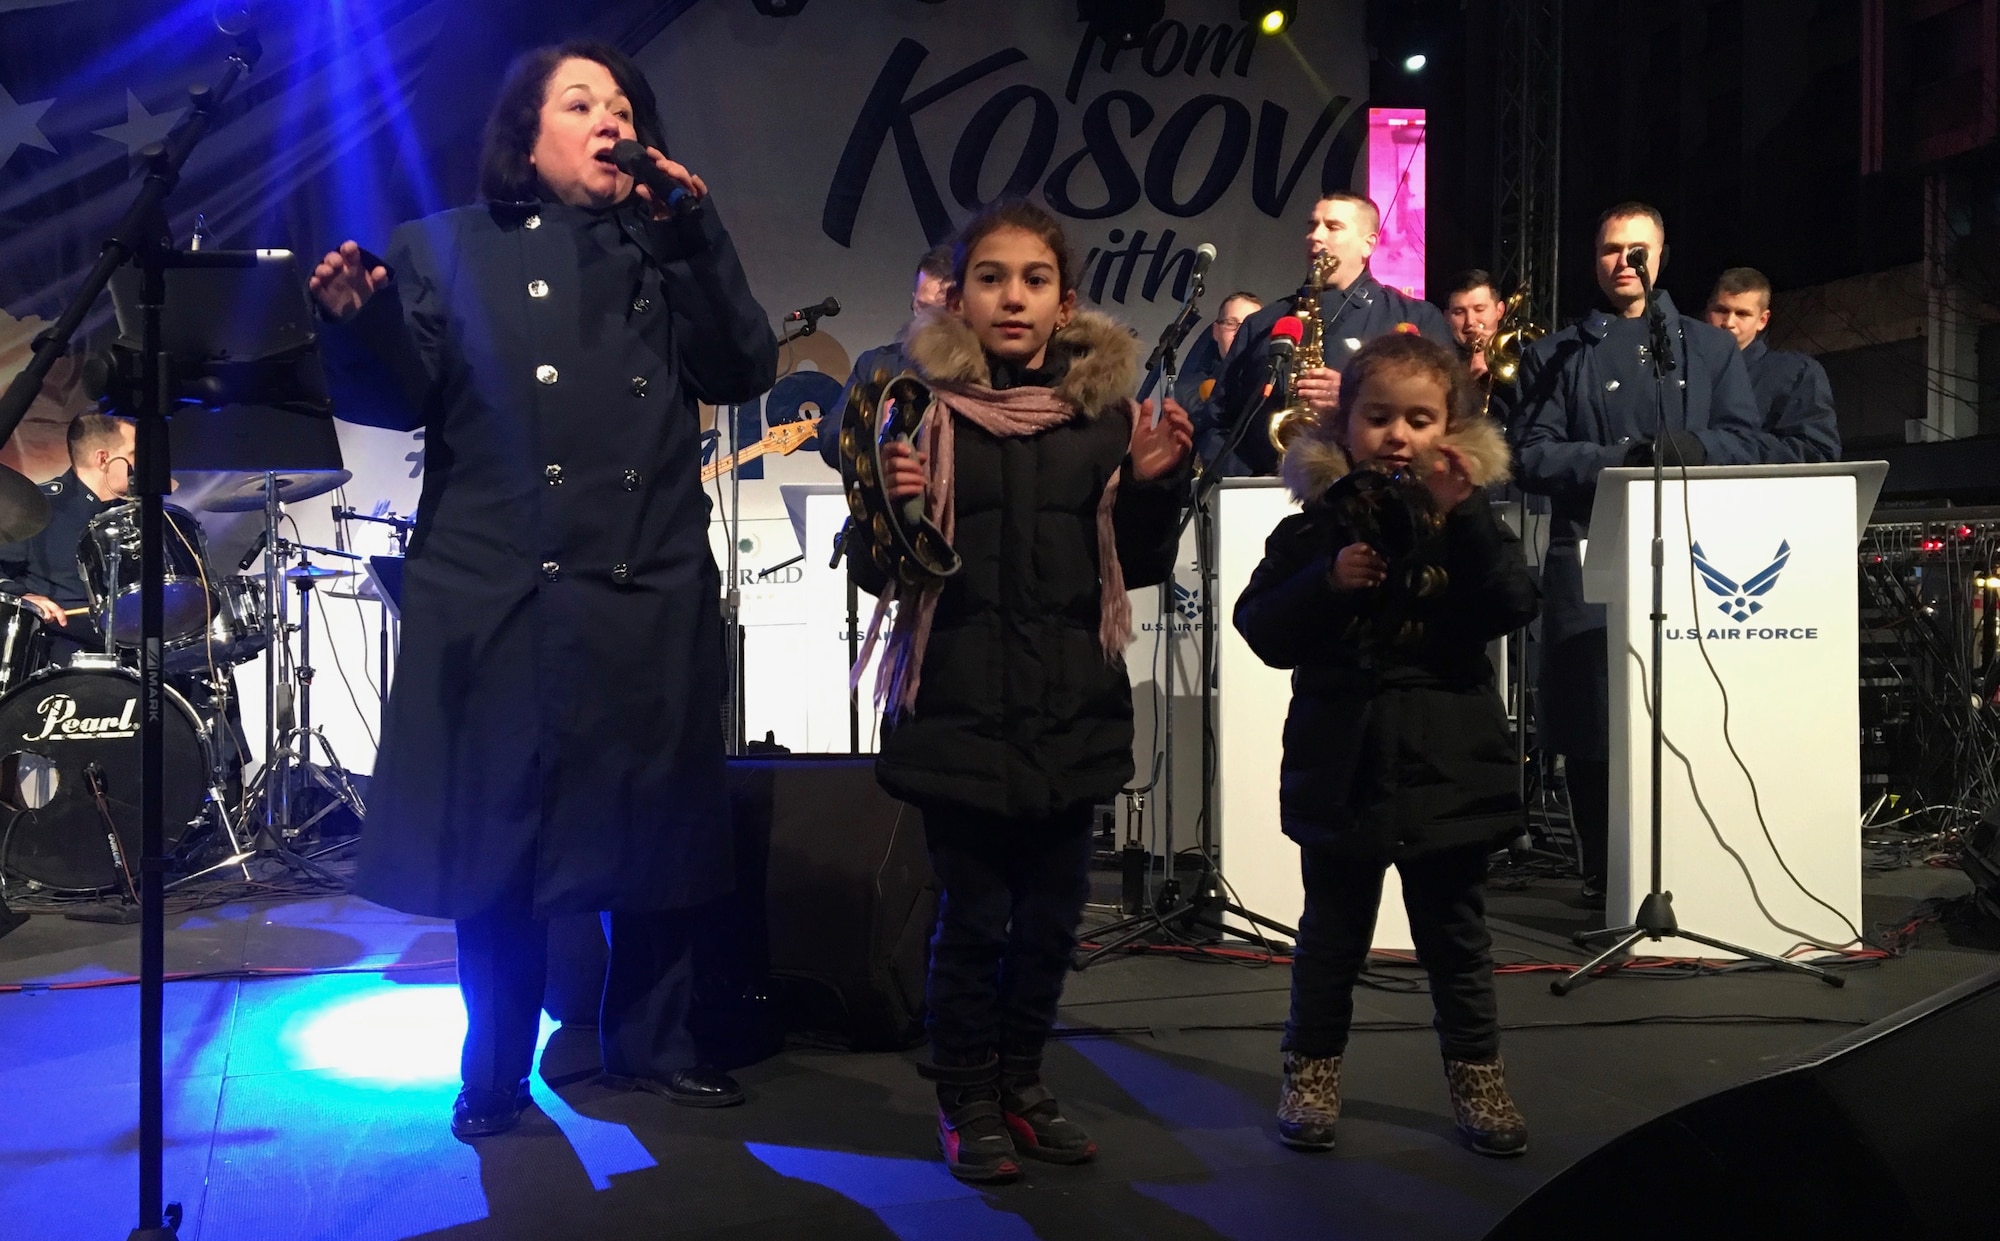 Two local girls join the U.S. Air Forces in Europe Band on stage during a show in Pristina, Kosovo, Feb. 15, 2018. The band visited and performed in Kosovo to celebrate the 10th anniversary of Kosovo independence. (U.S. Air Force photo by Maj. Tristan Hinderliter)